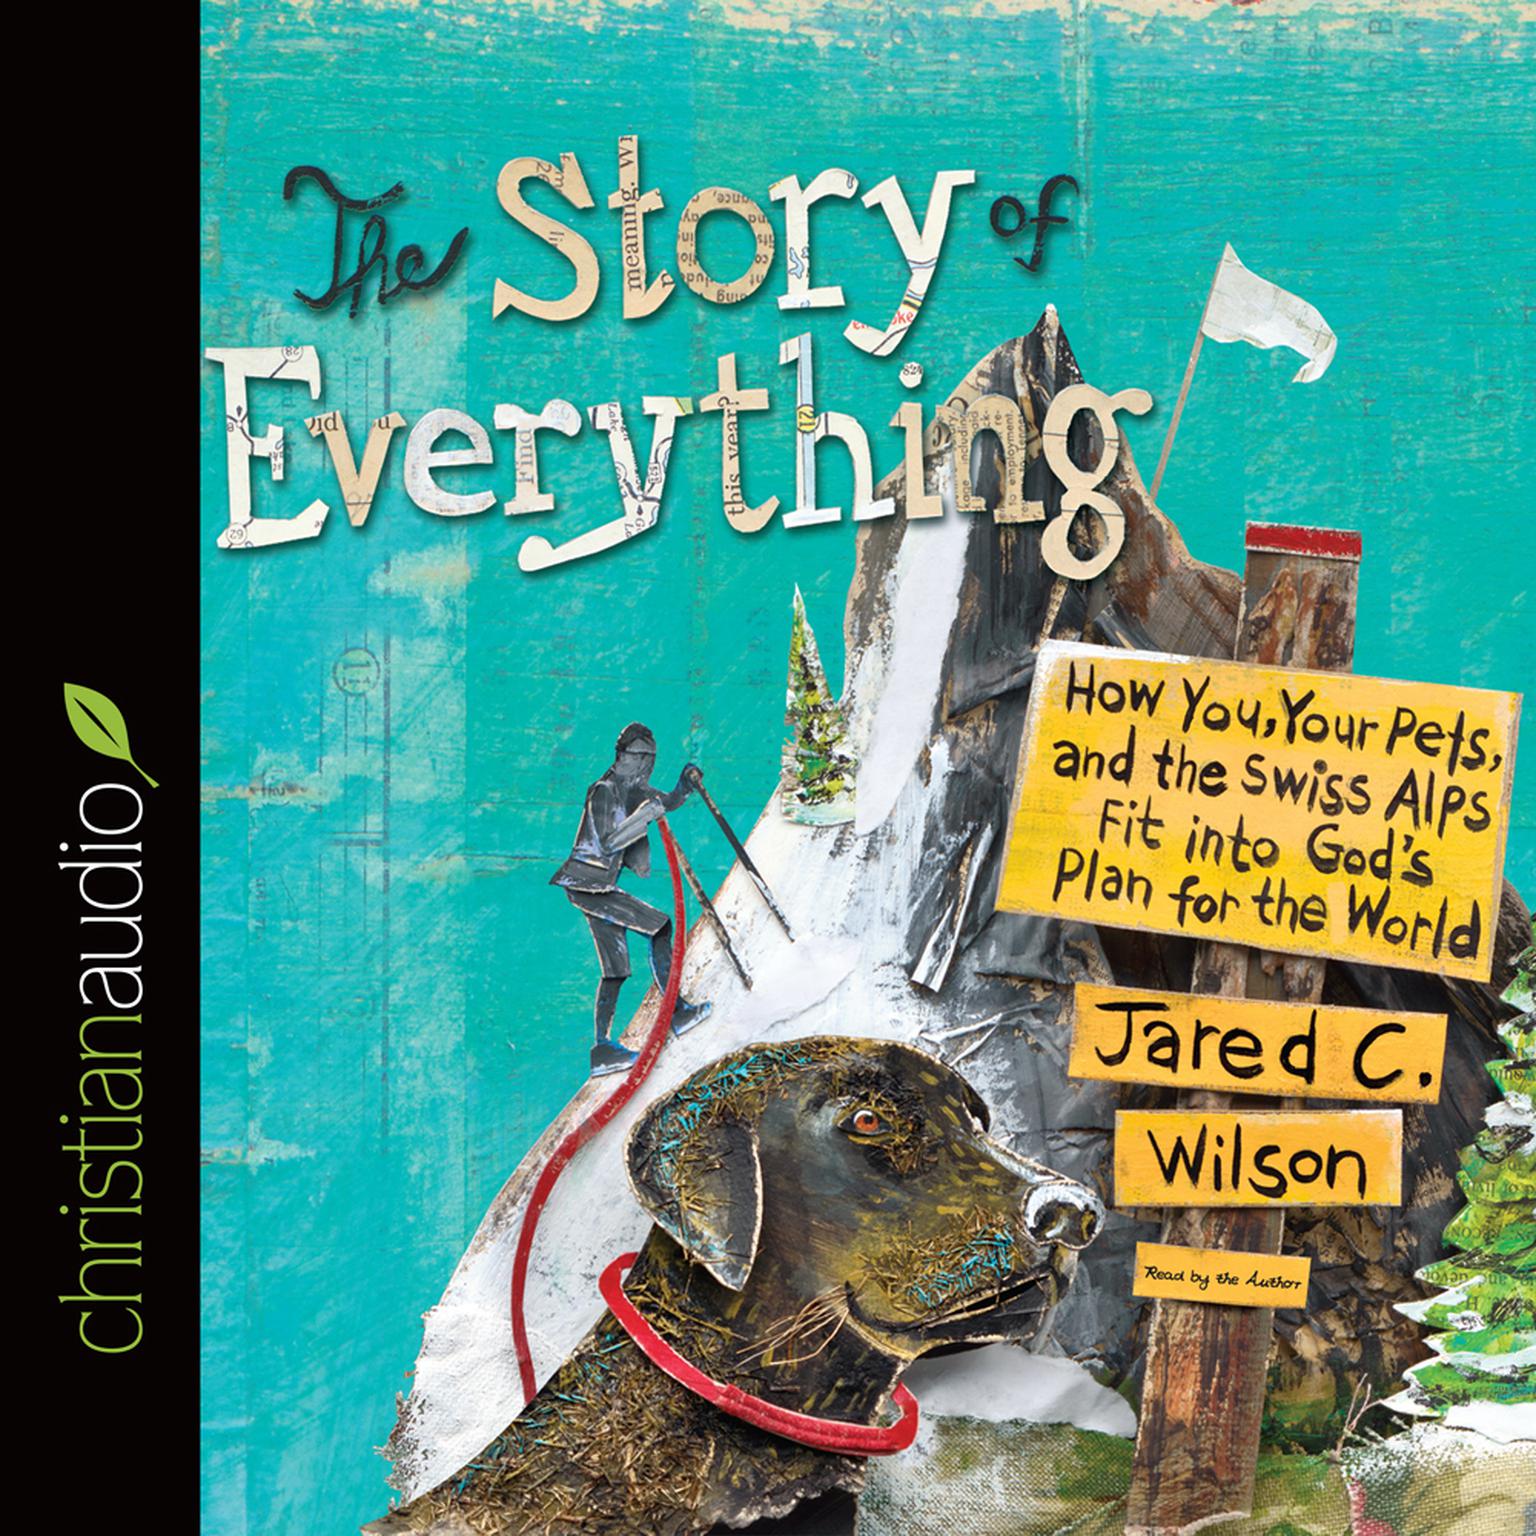 Story of Everything: How You, Your Pets, and the Swiss Alps Fit into Gods Plan for the World Audiobook, by Jared C. Wilson